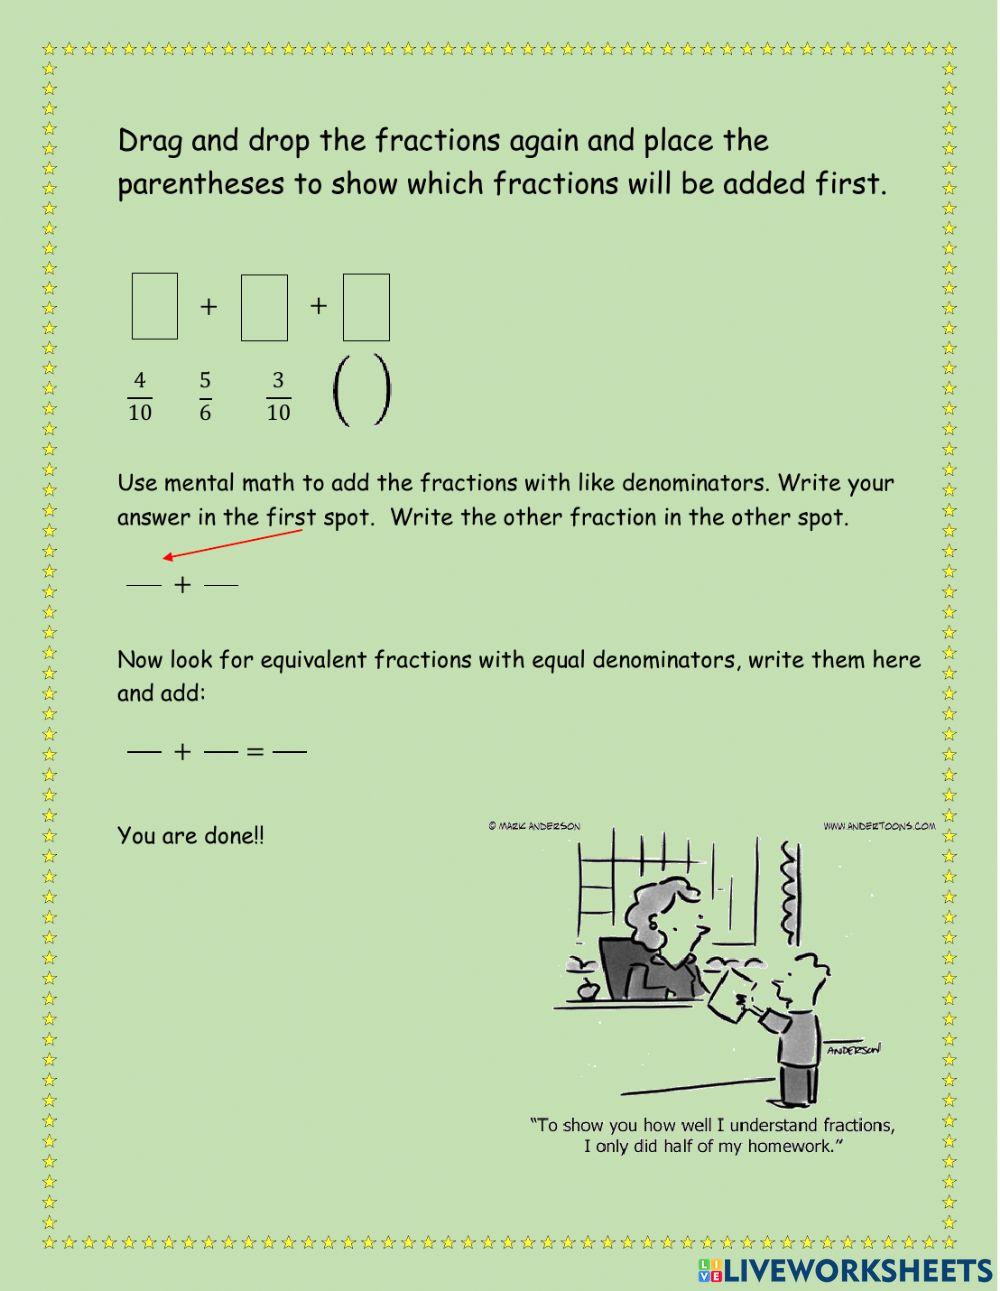 Using addition properties for adding fractions